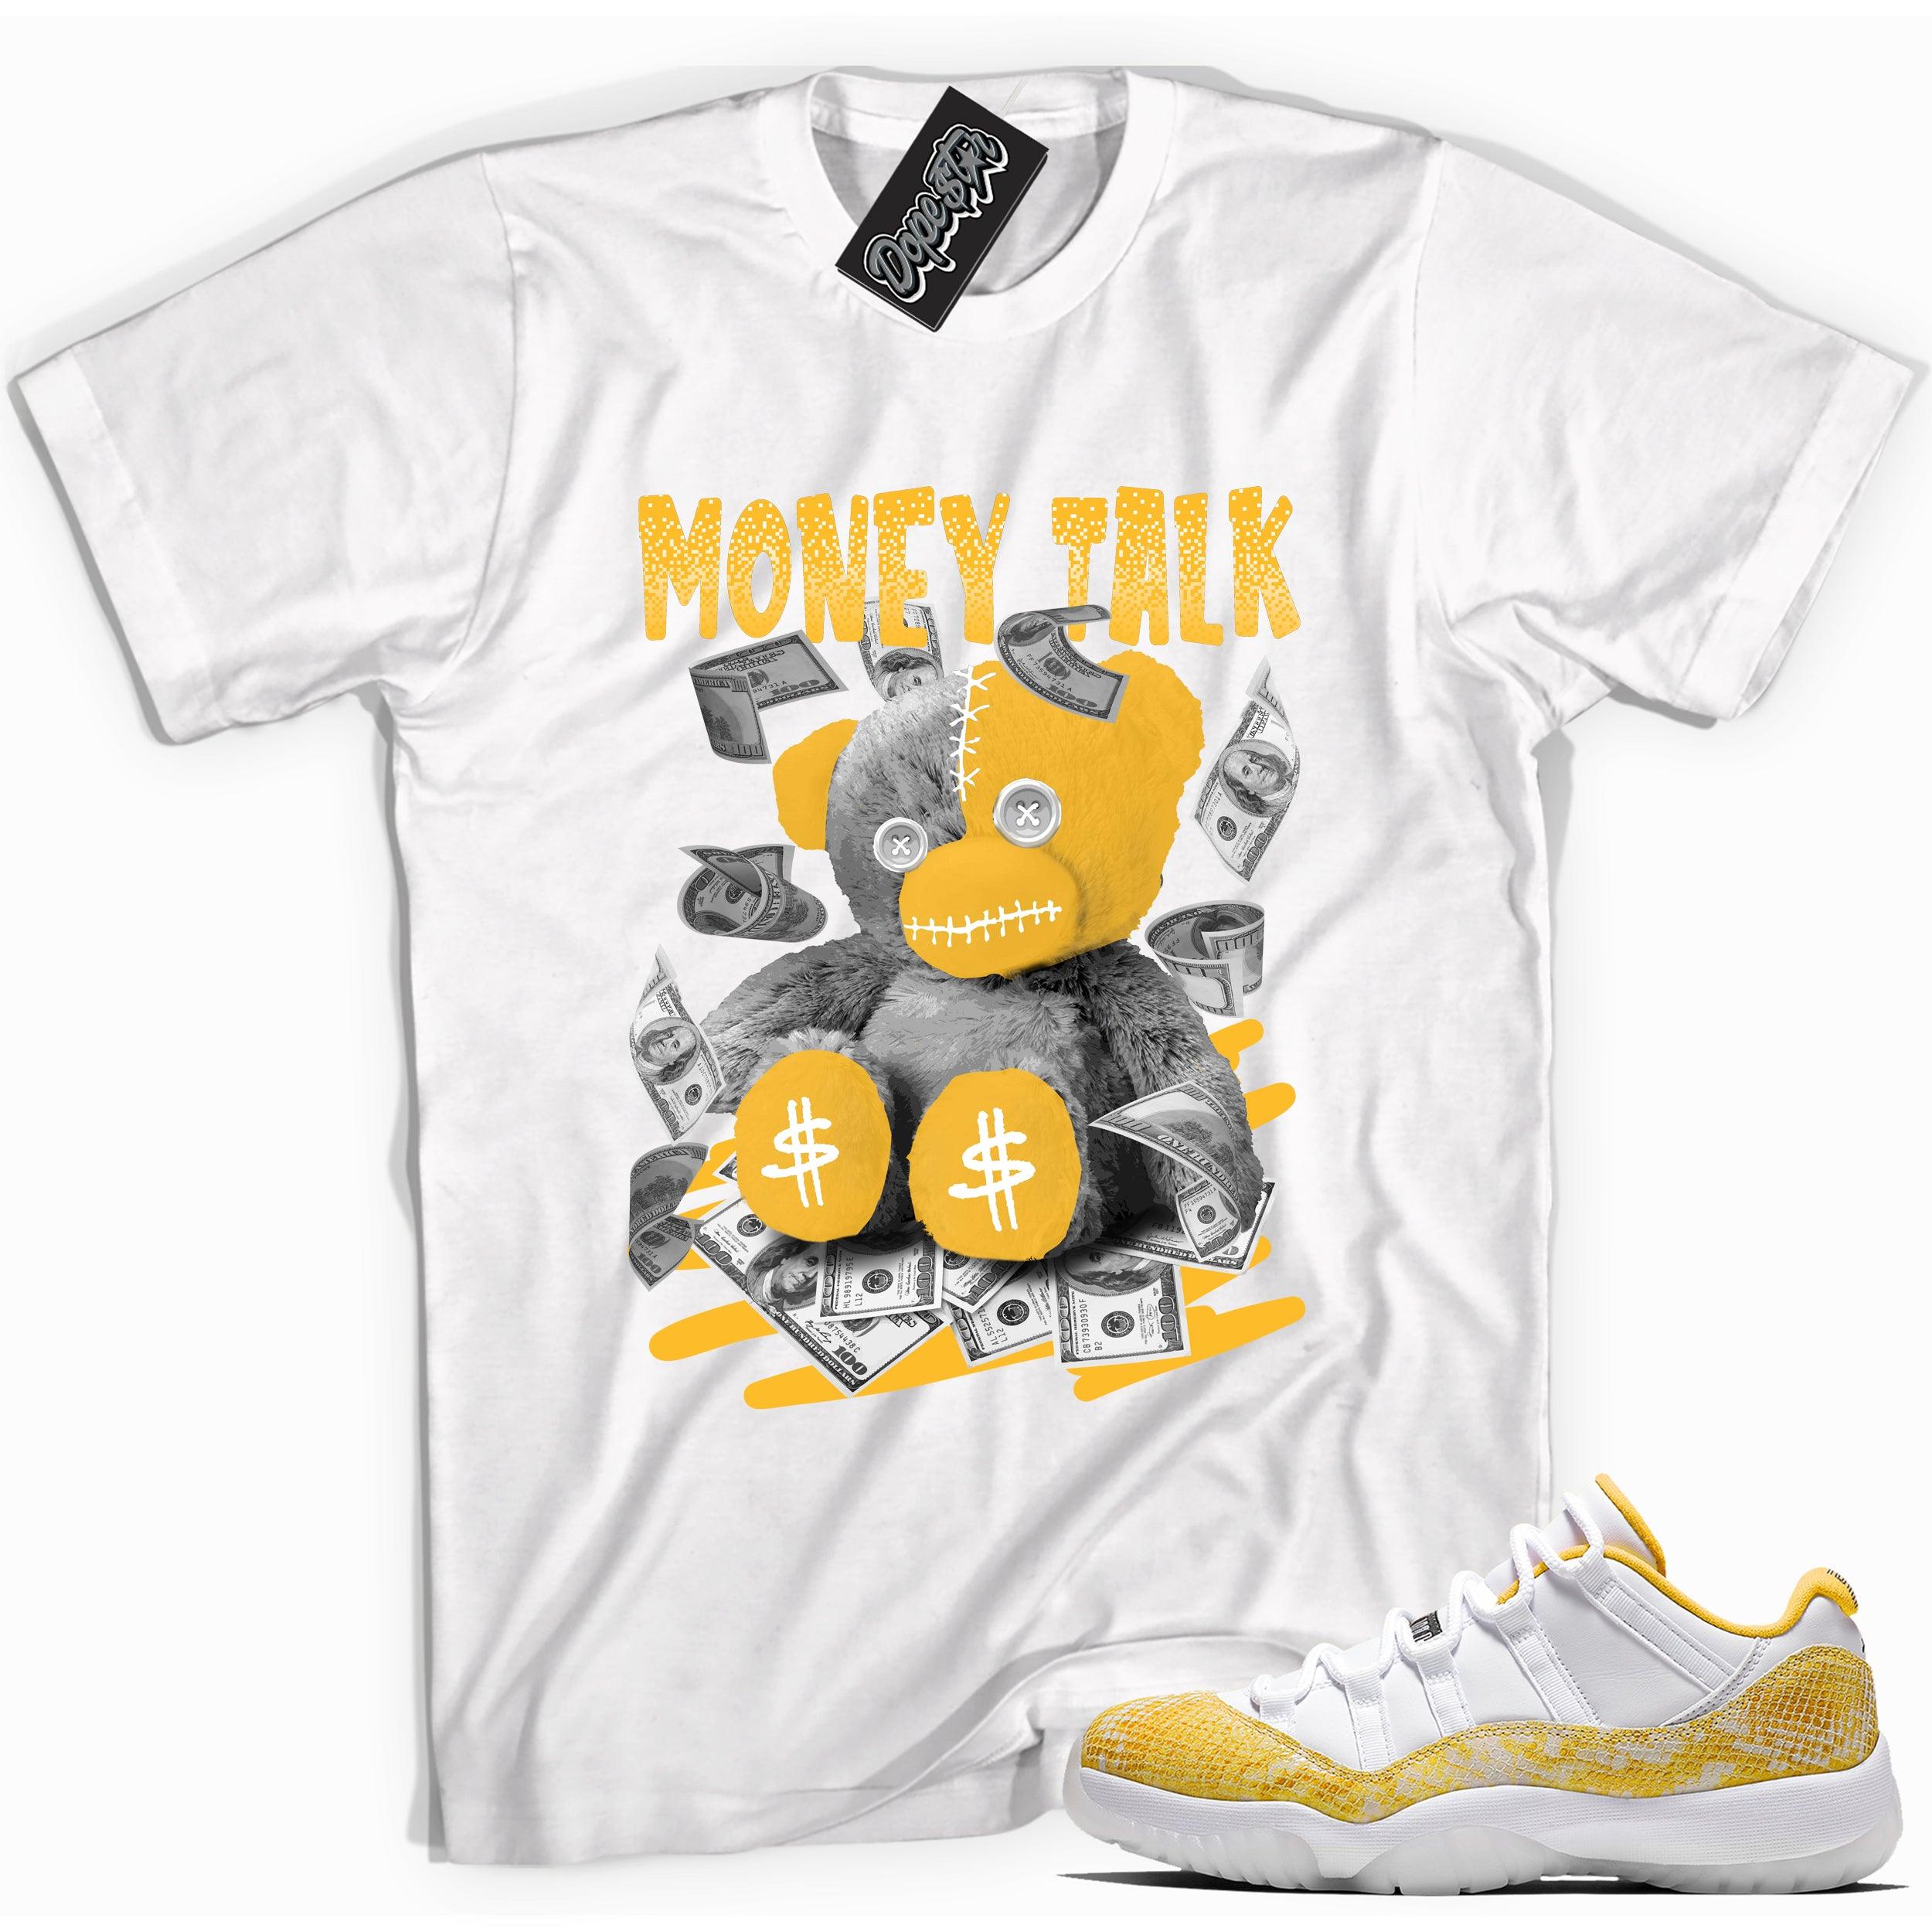 Cool white graphic tee with 'money talk bear' print, that perfectly matches Air Jordan 11 Retro Low Yellow Snakeskin sneakers